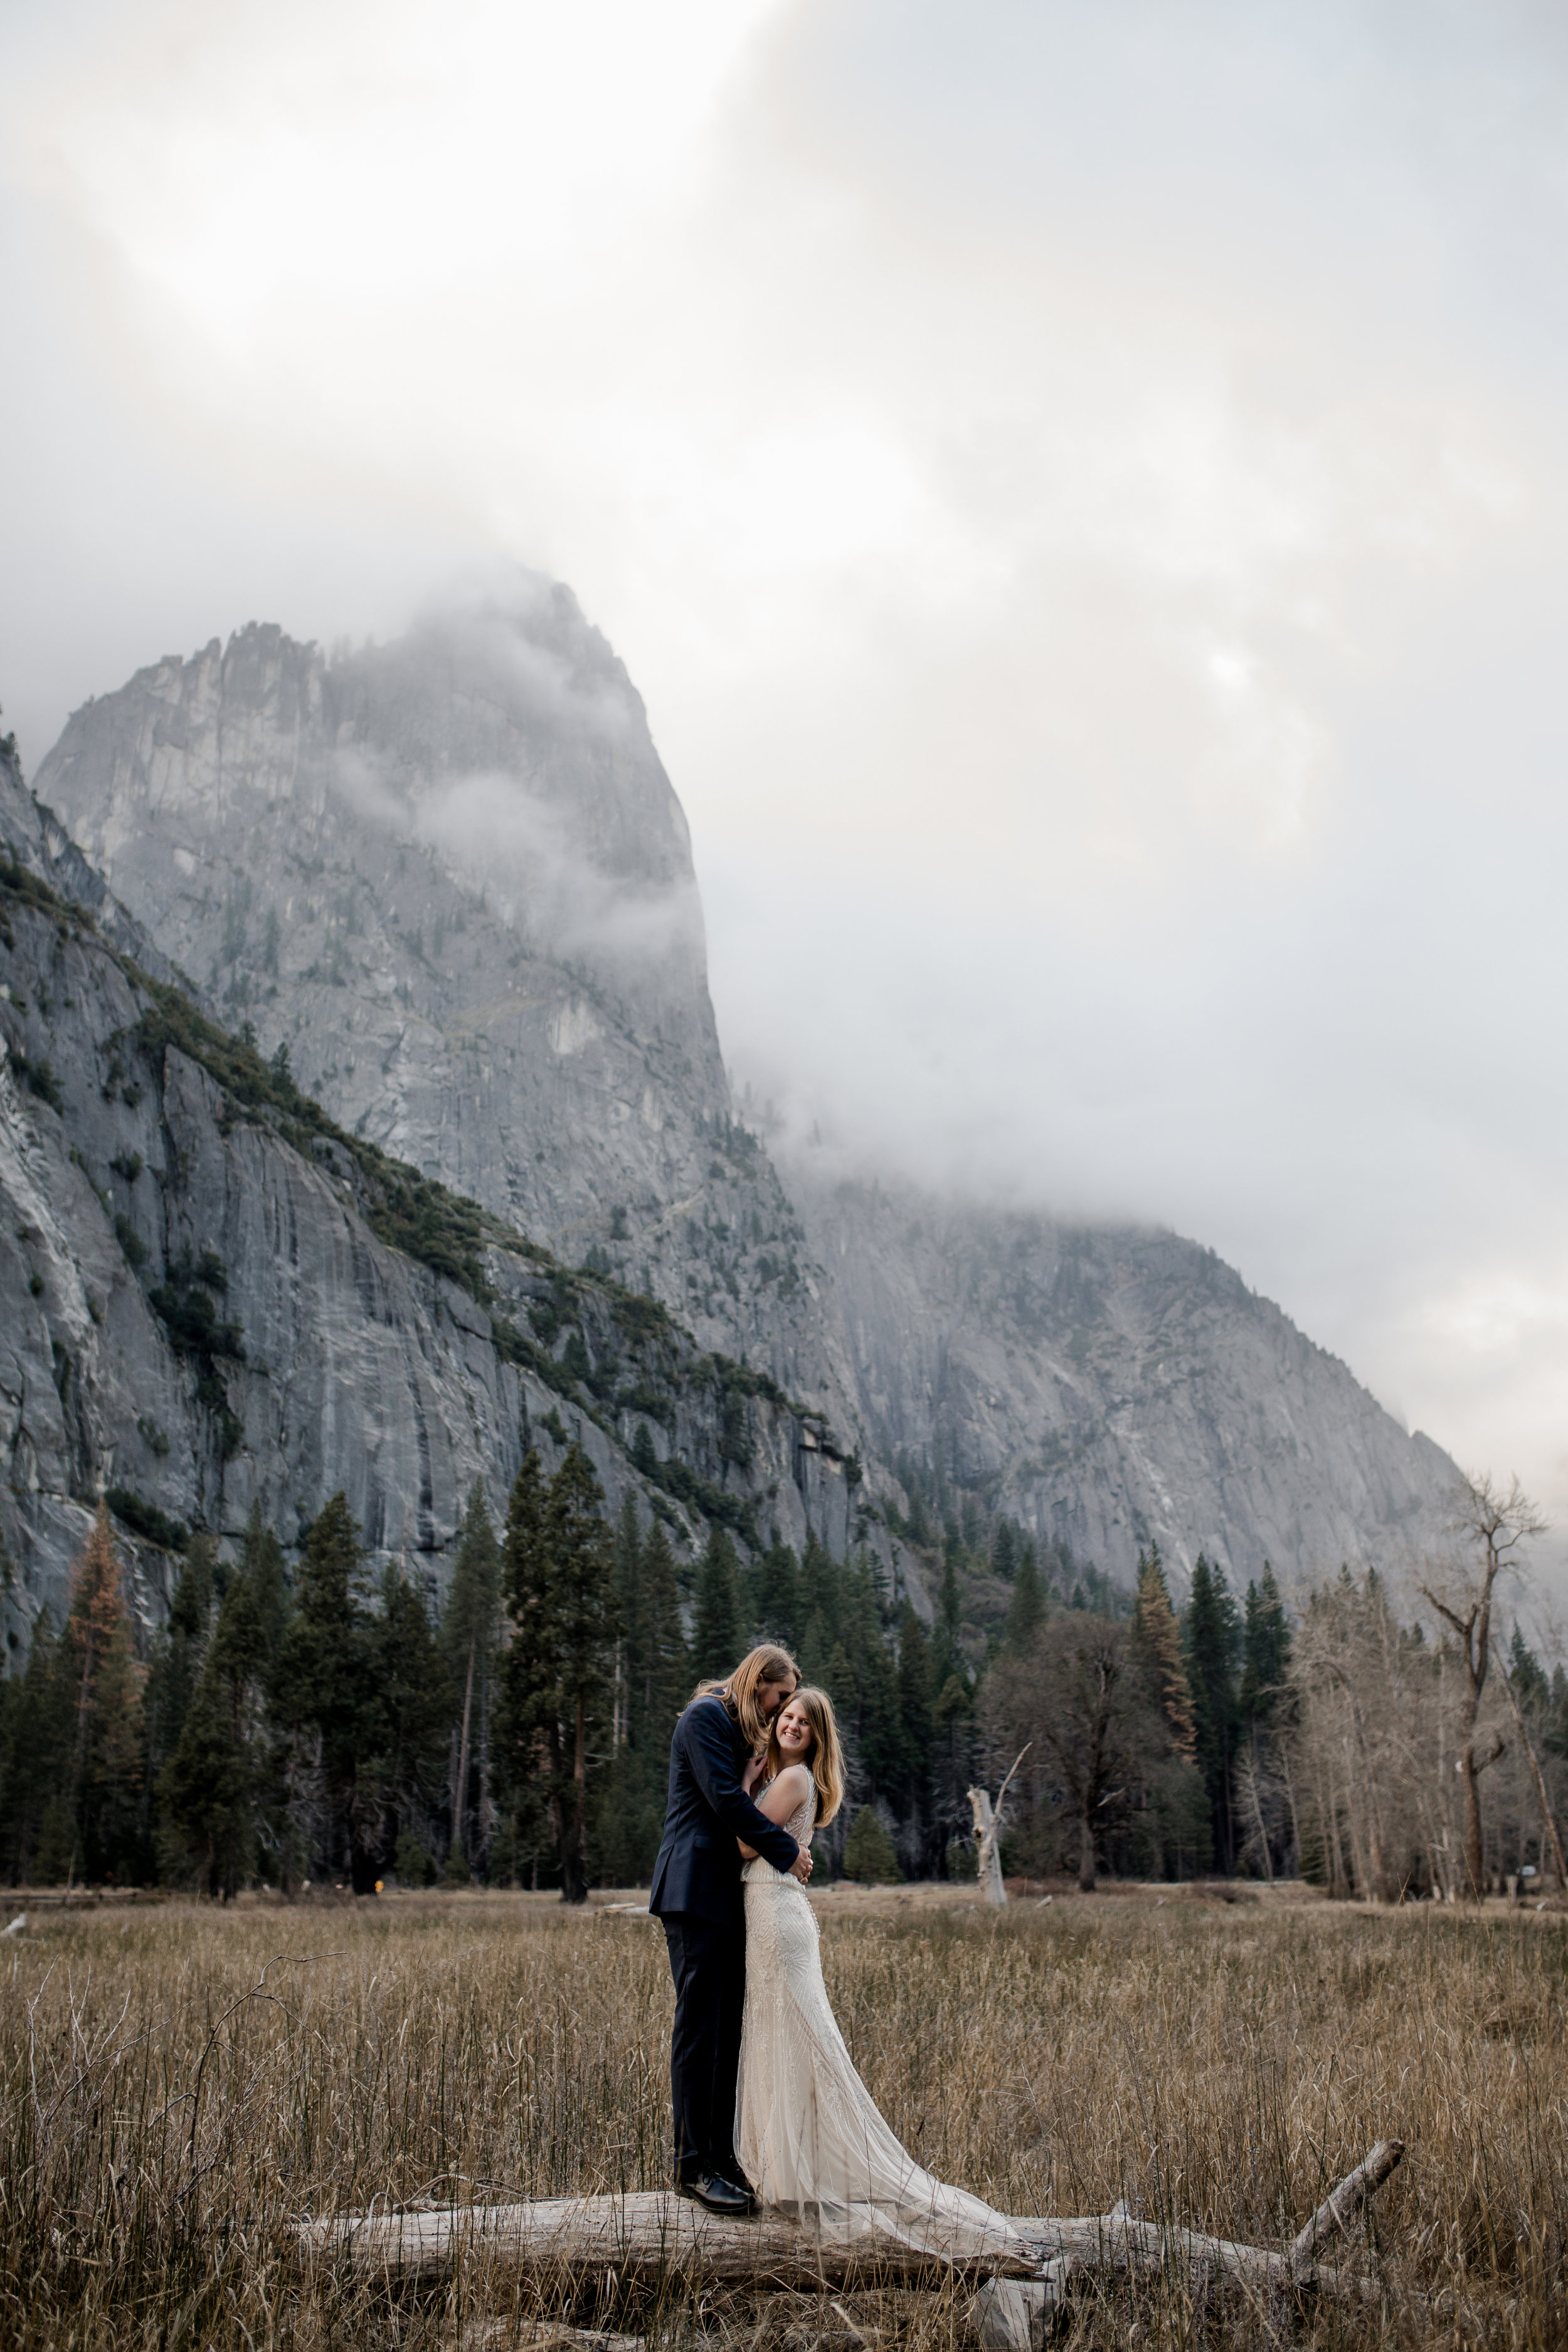 nicole-daacke-photography-yousemite-national-park-elopement-photographer-winter-cloud-moody-elope-inspiration-yosemite-valley-tunnel-view-winter-cloud-fog-weather-wedding-photos-79.jpg